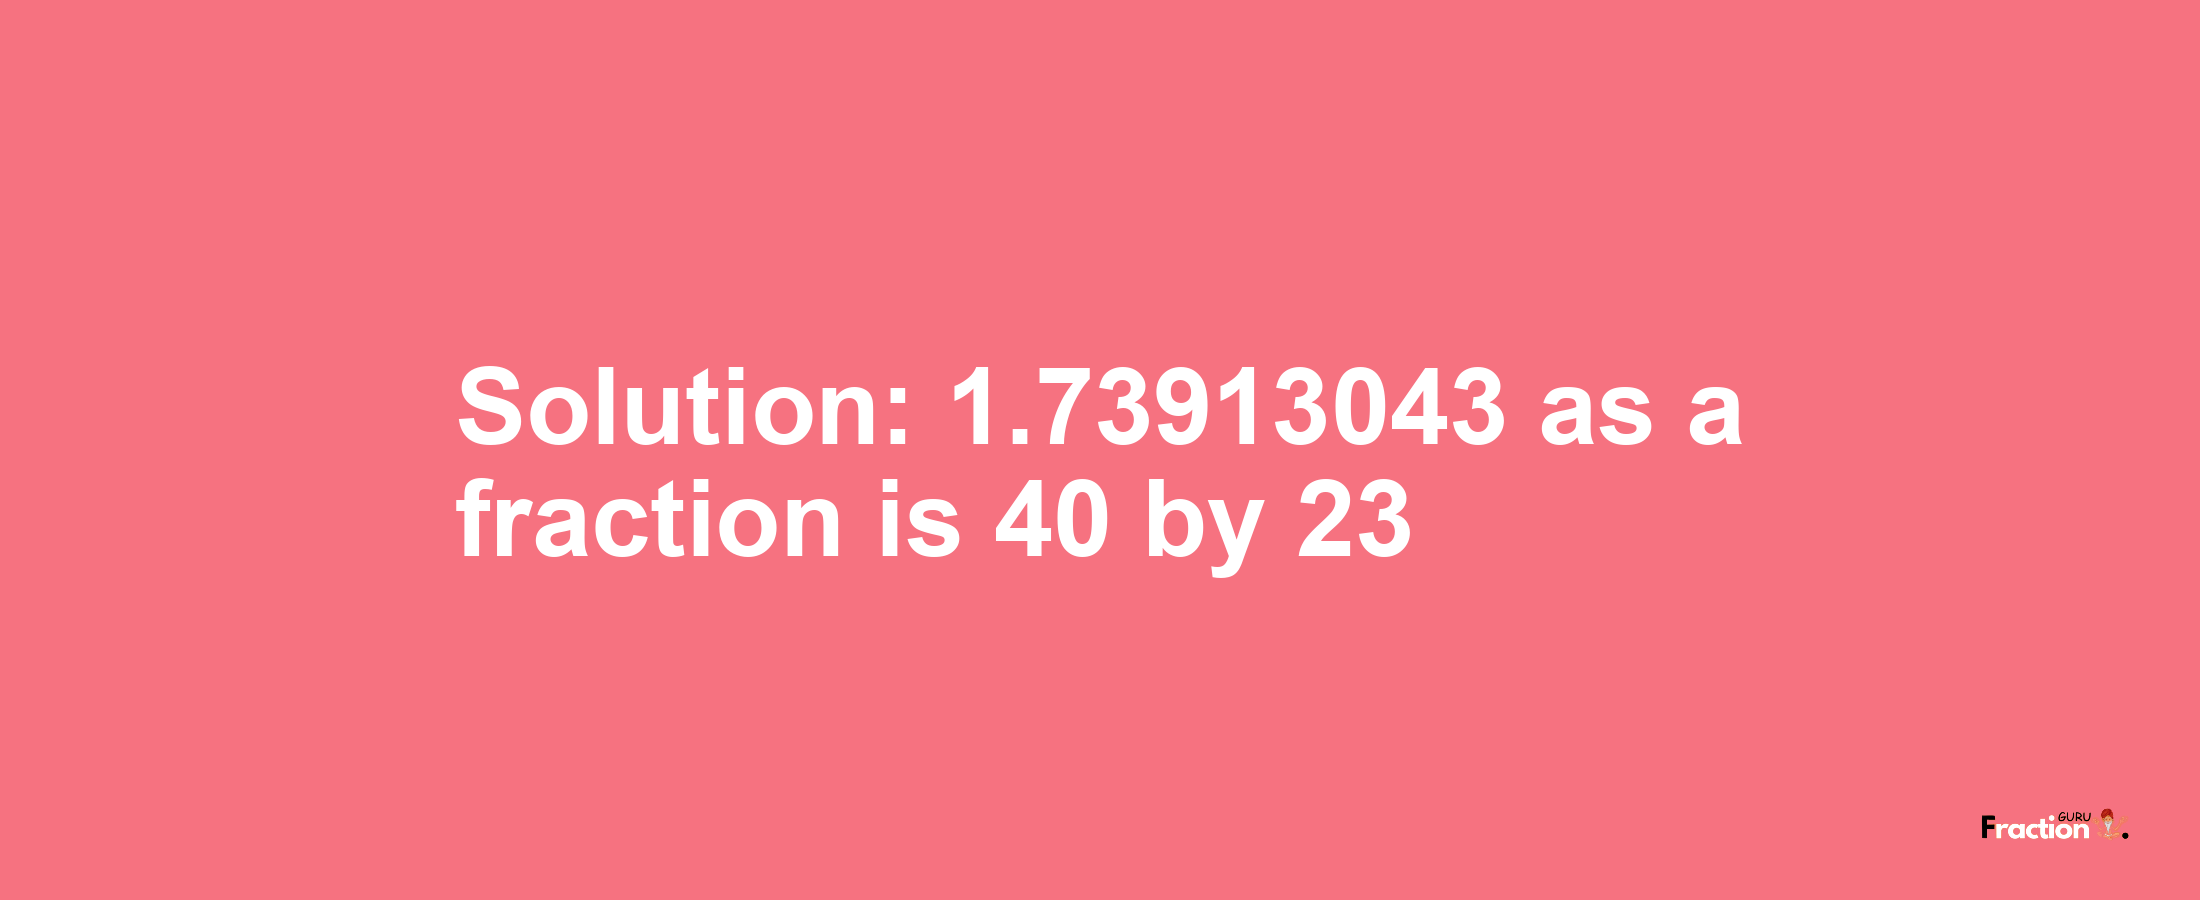 Solution:1.73913043 as a fraction is 40/23